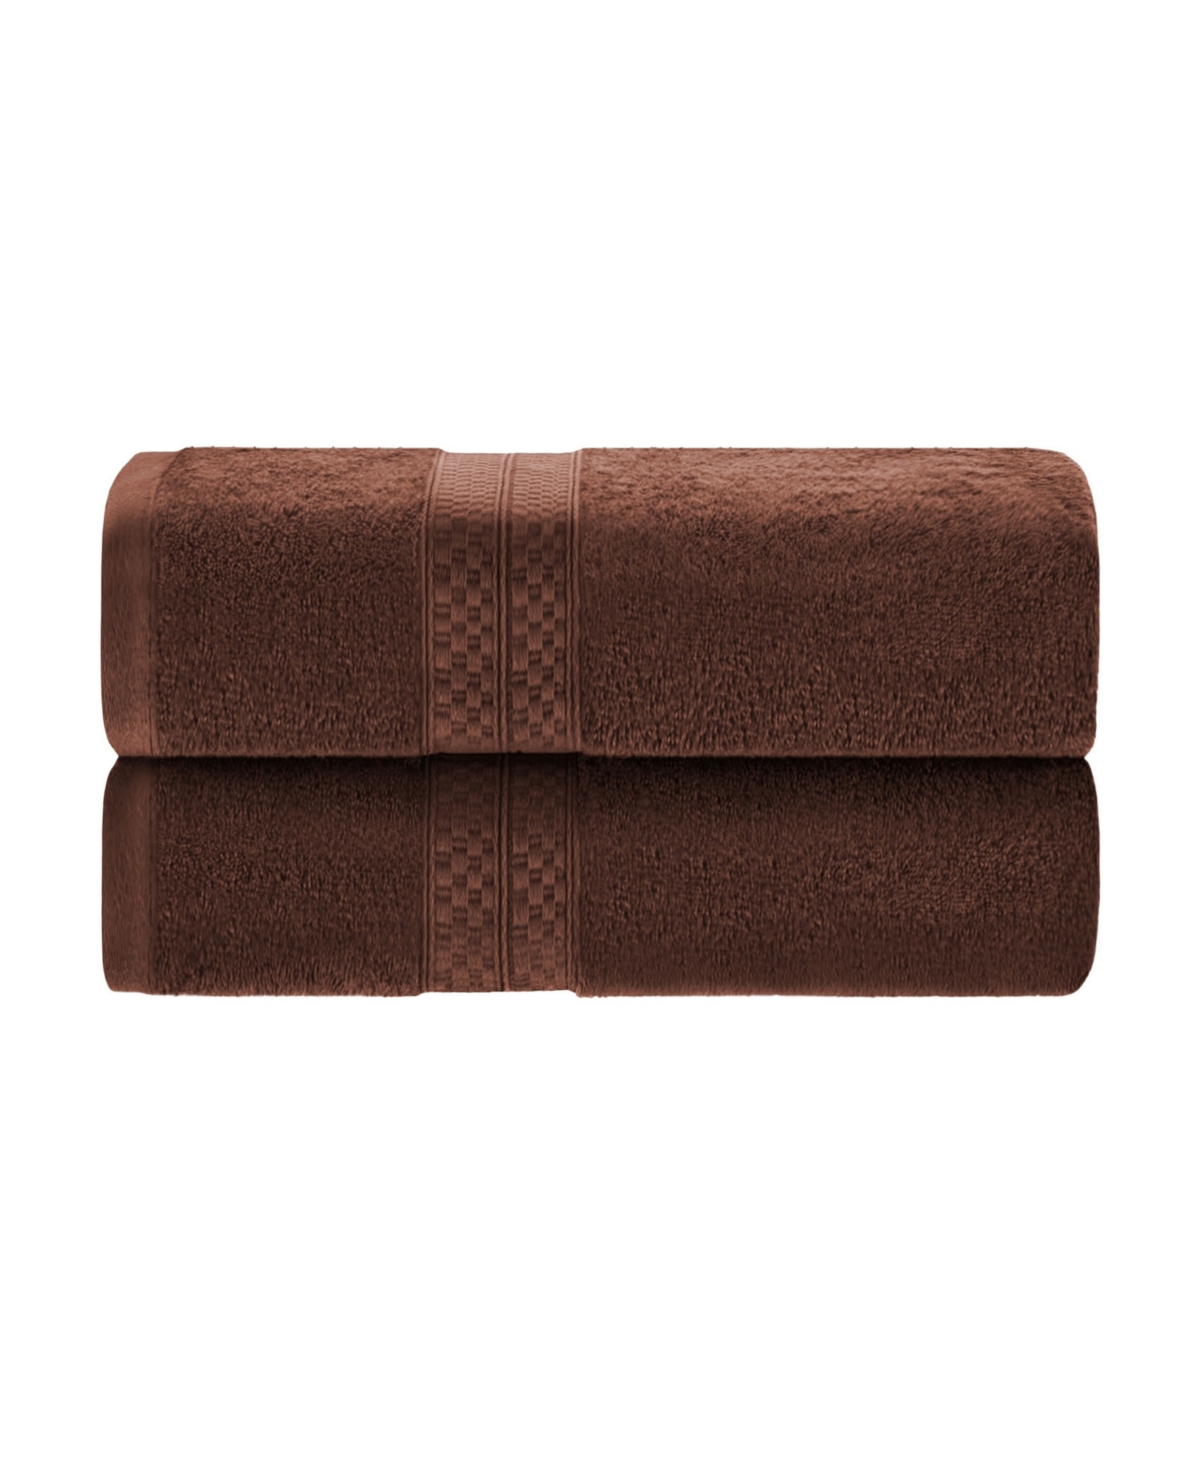 Superior Rayon From Bamboo Blend Ultra Soft Quick Drying Solid 2 Piece Bath Towel Set, 54" L X 30" W In Cocoa